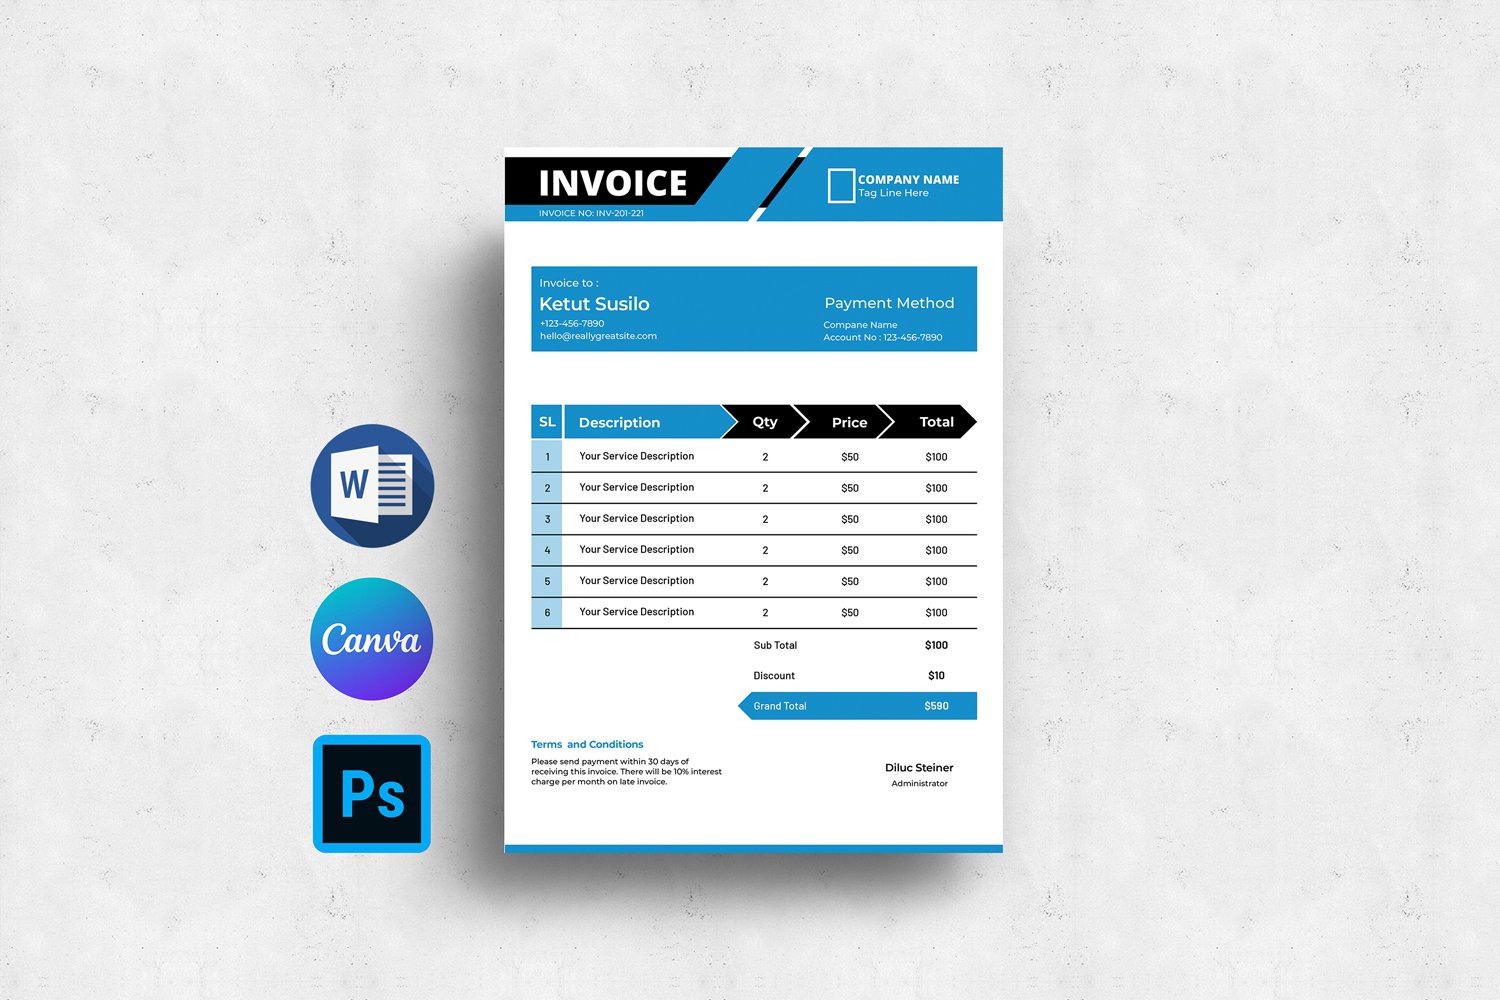 Template #372633 Invoice Template Webdesign Template - Logo template Preview